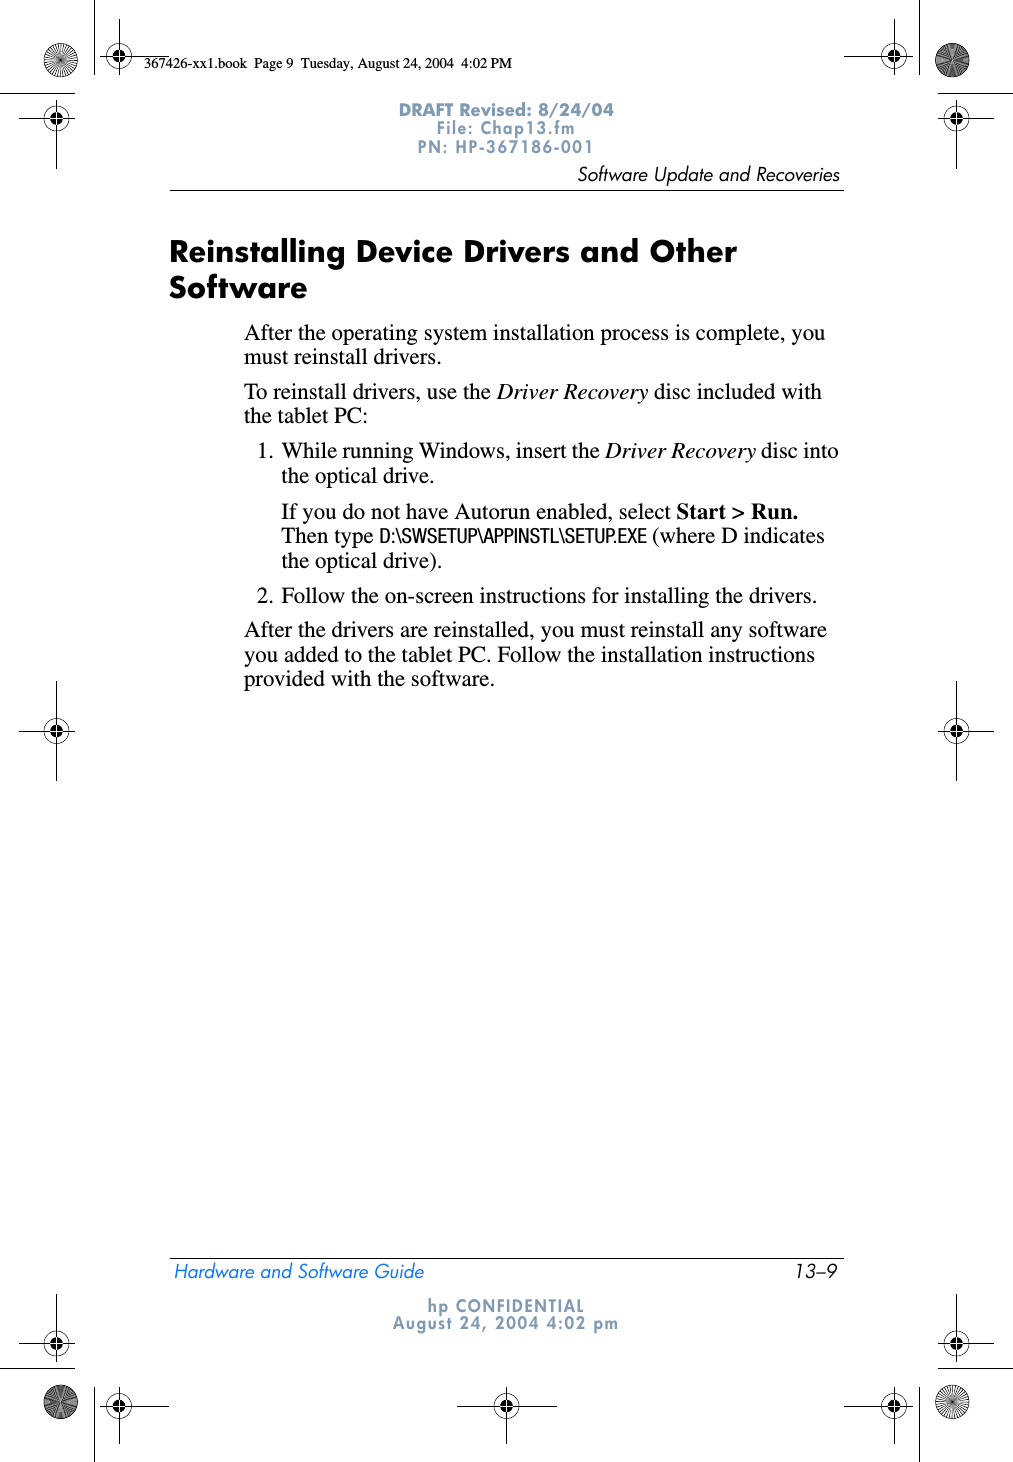 Software Update and RecoveriesHardware and Software Guide 13–9DRAFT Revised: 8/24/04File: Chap13.fm PN: HP-367186-001 hp CONFIDENTIALAugust 24, 2004 4:02 pmReinstalling Device Drivers and Other SoftwareAfter the operating system installation process is complete, you must reinstall drivers. To reinstall drivers, use the Driver Recovery disc included with the tablet PC:1. While running Windows, insert the Driver Recovery disc into the optical drive.If you do not have Autorun enabled, select Start &gt; Run. Then type D:\SWSETUP\APPINSTL\SETUP.EXE (where D indicates the optical drive).2. Follow the on-screen instructions for installing the drivers.After the drivers are reinstalled, you must reinstall any software you added to the tablet PC. Follow the installation instructions provided with the software.367426-xx1.book  Page 9  Tuesday, August 24, 2004  4:02 PM